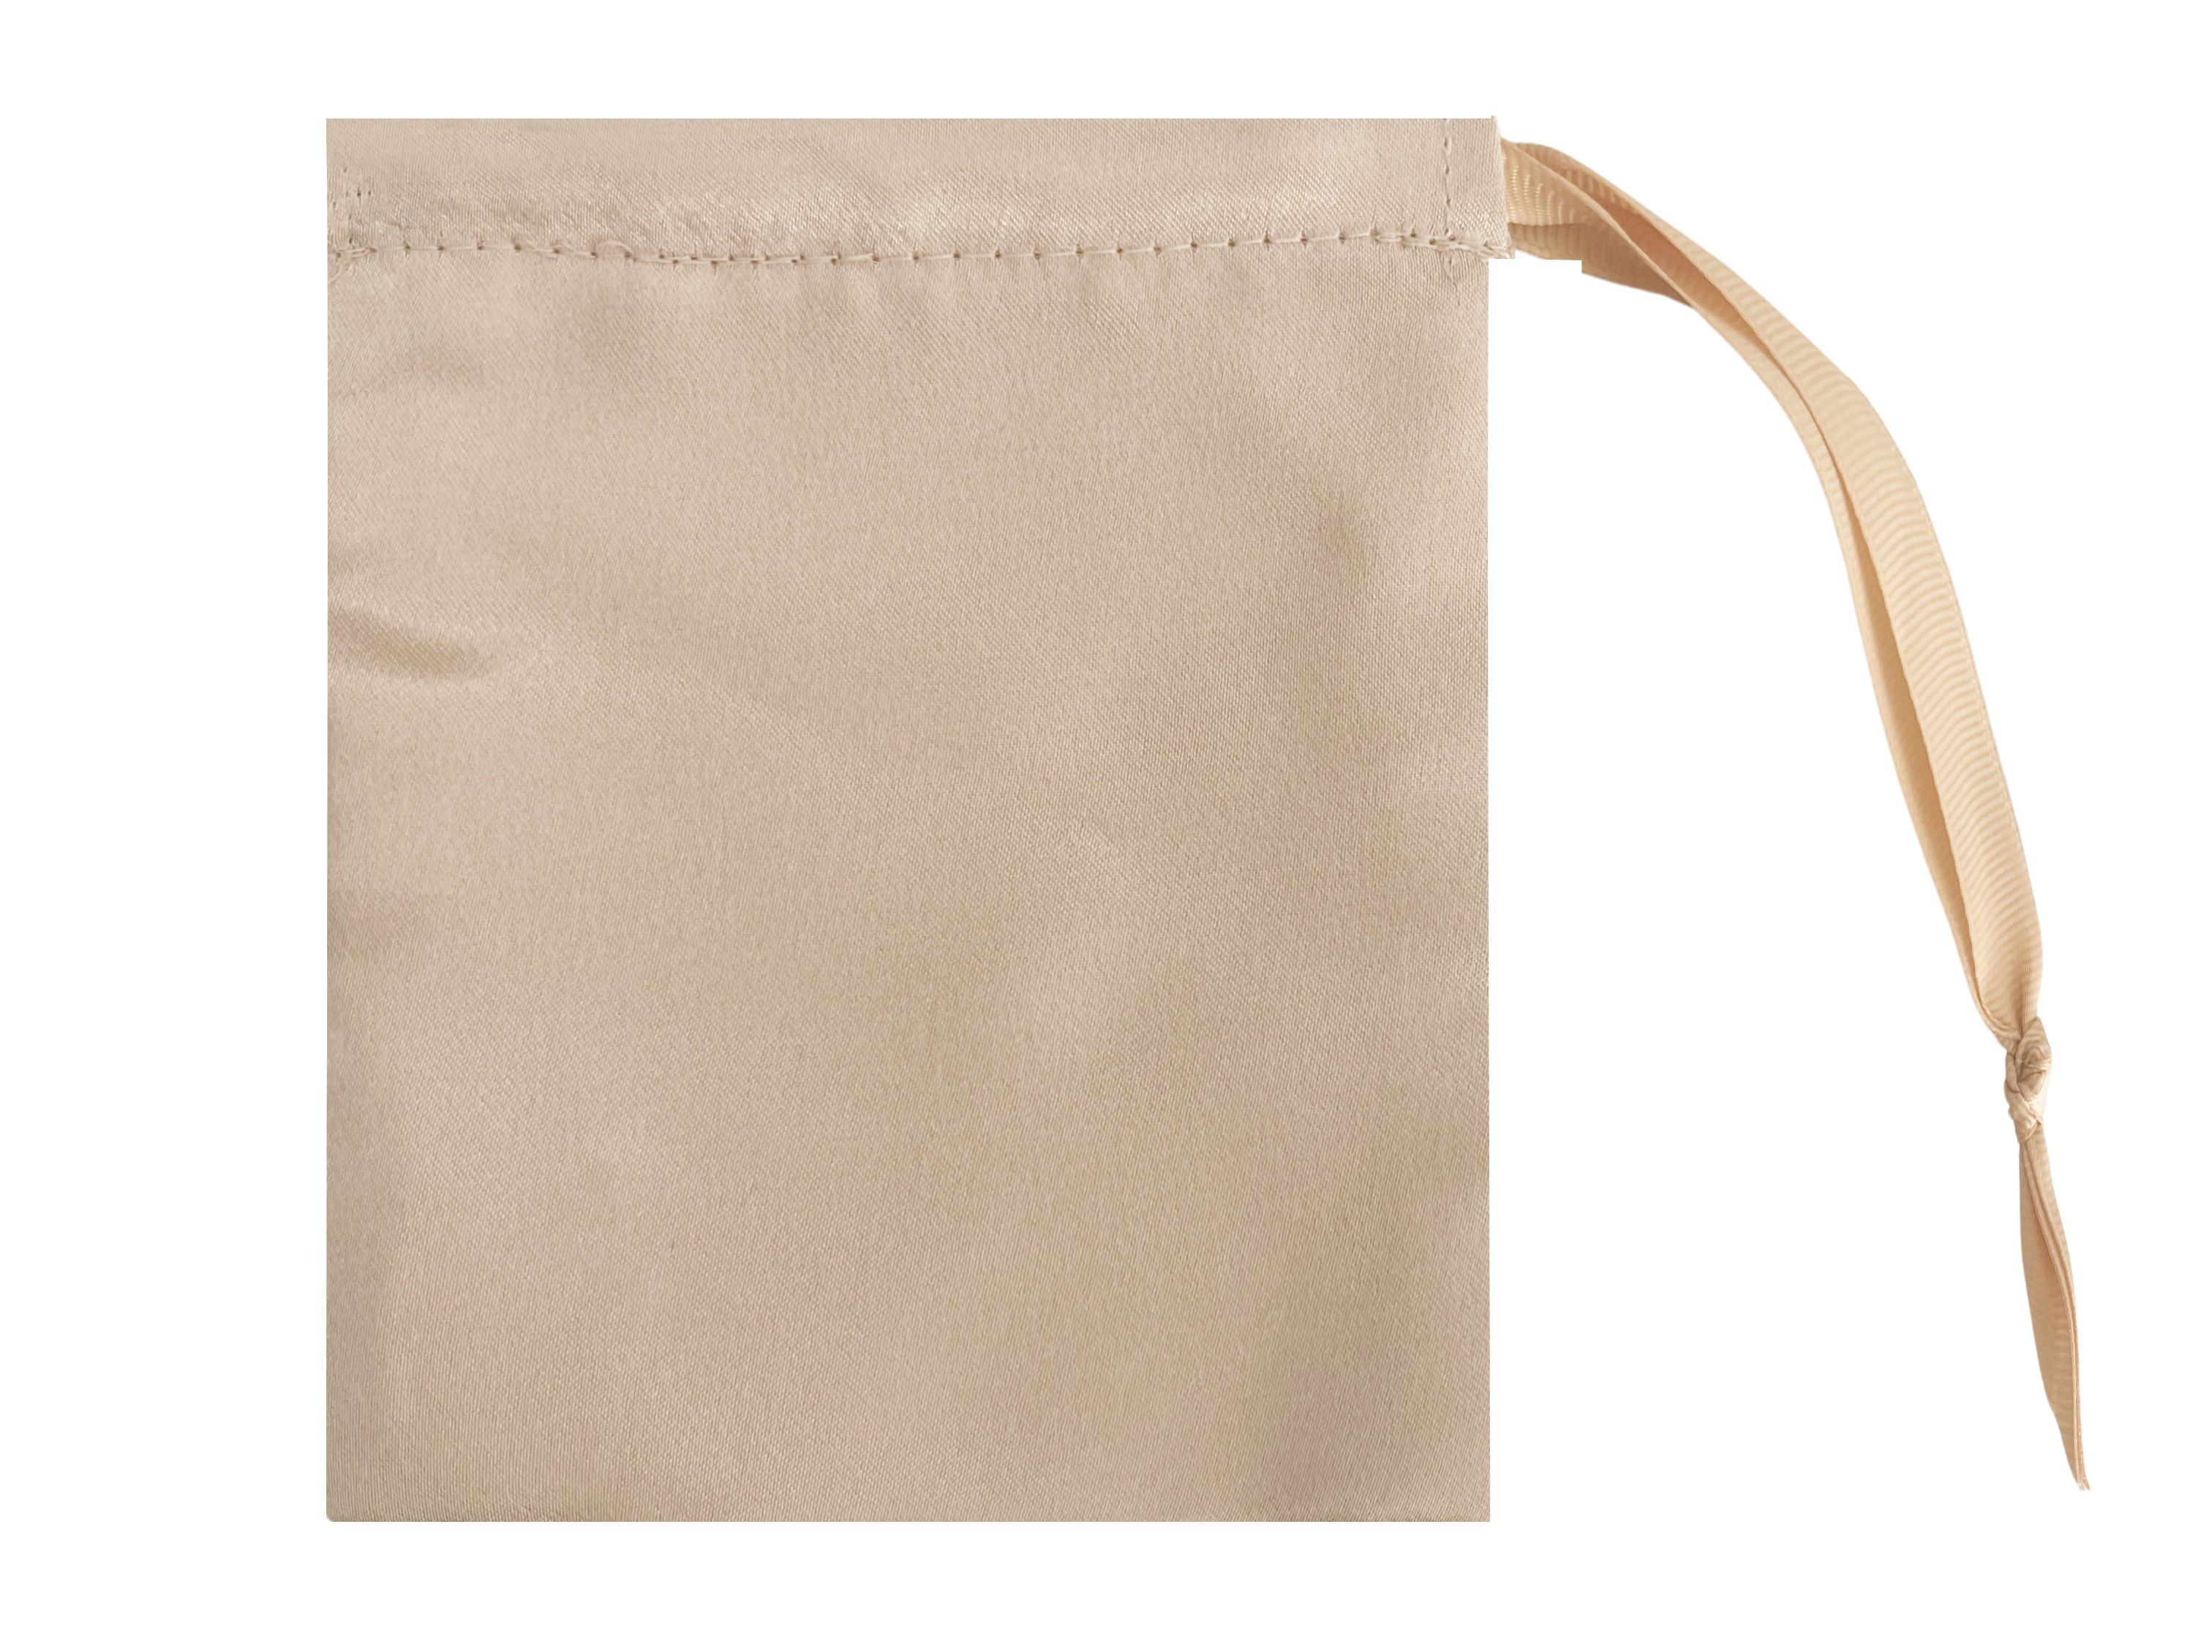 Nude Satin Accessory Bag for purses, shoes, jewelry and more